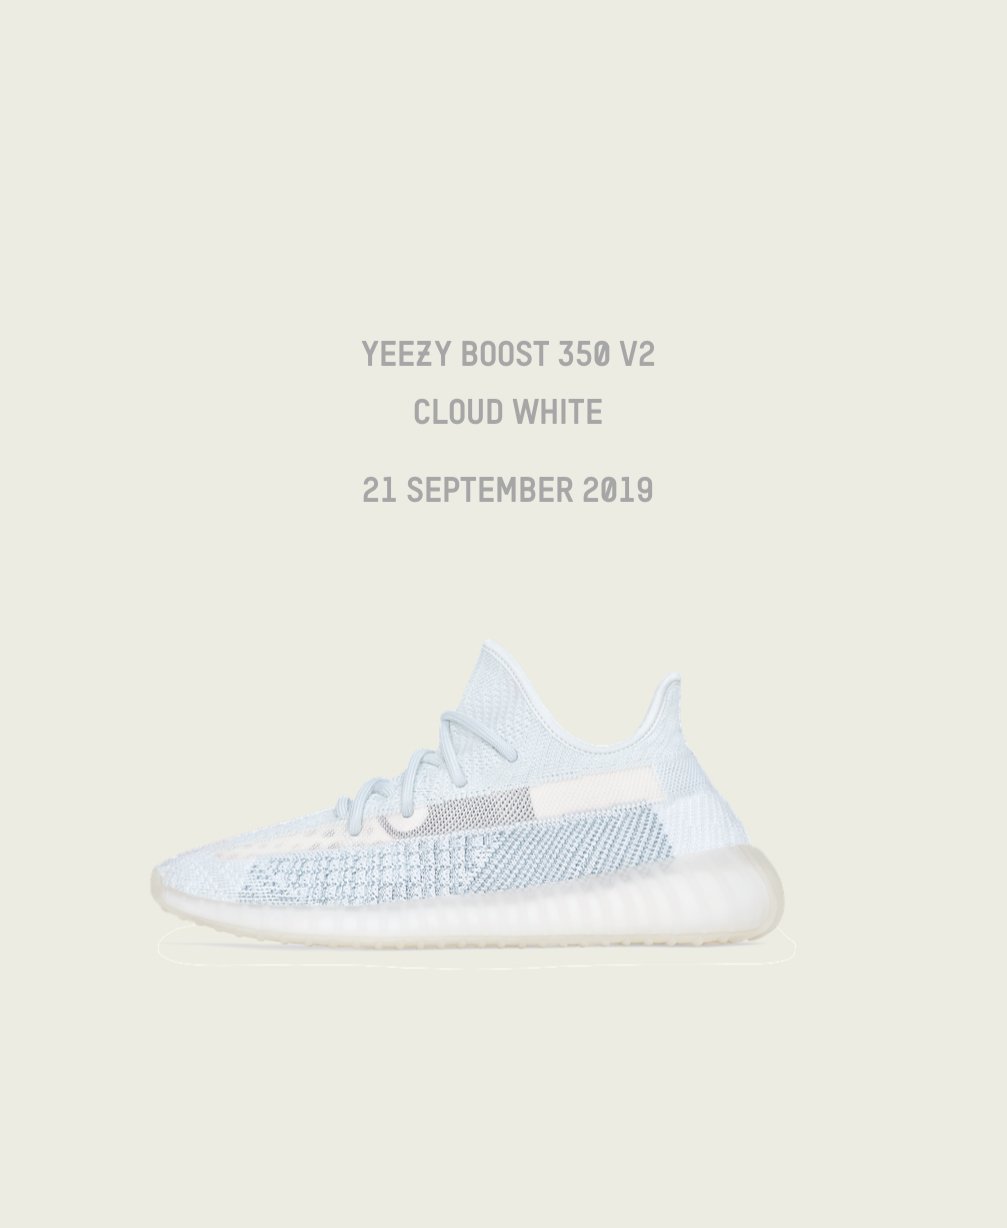 Yeezy Boost 350 V2 Cloud White. Coming 